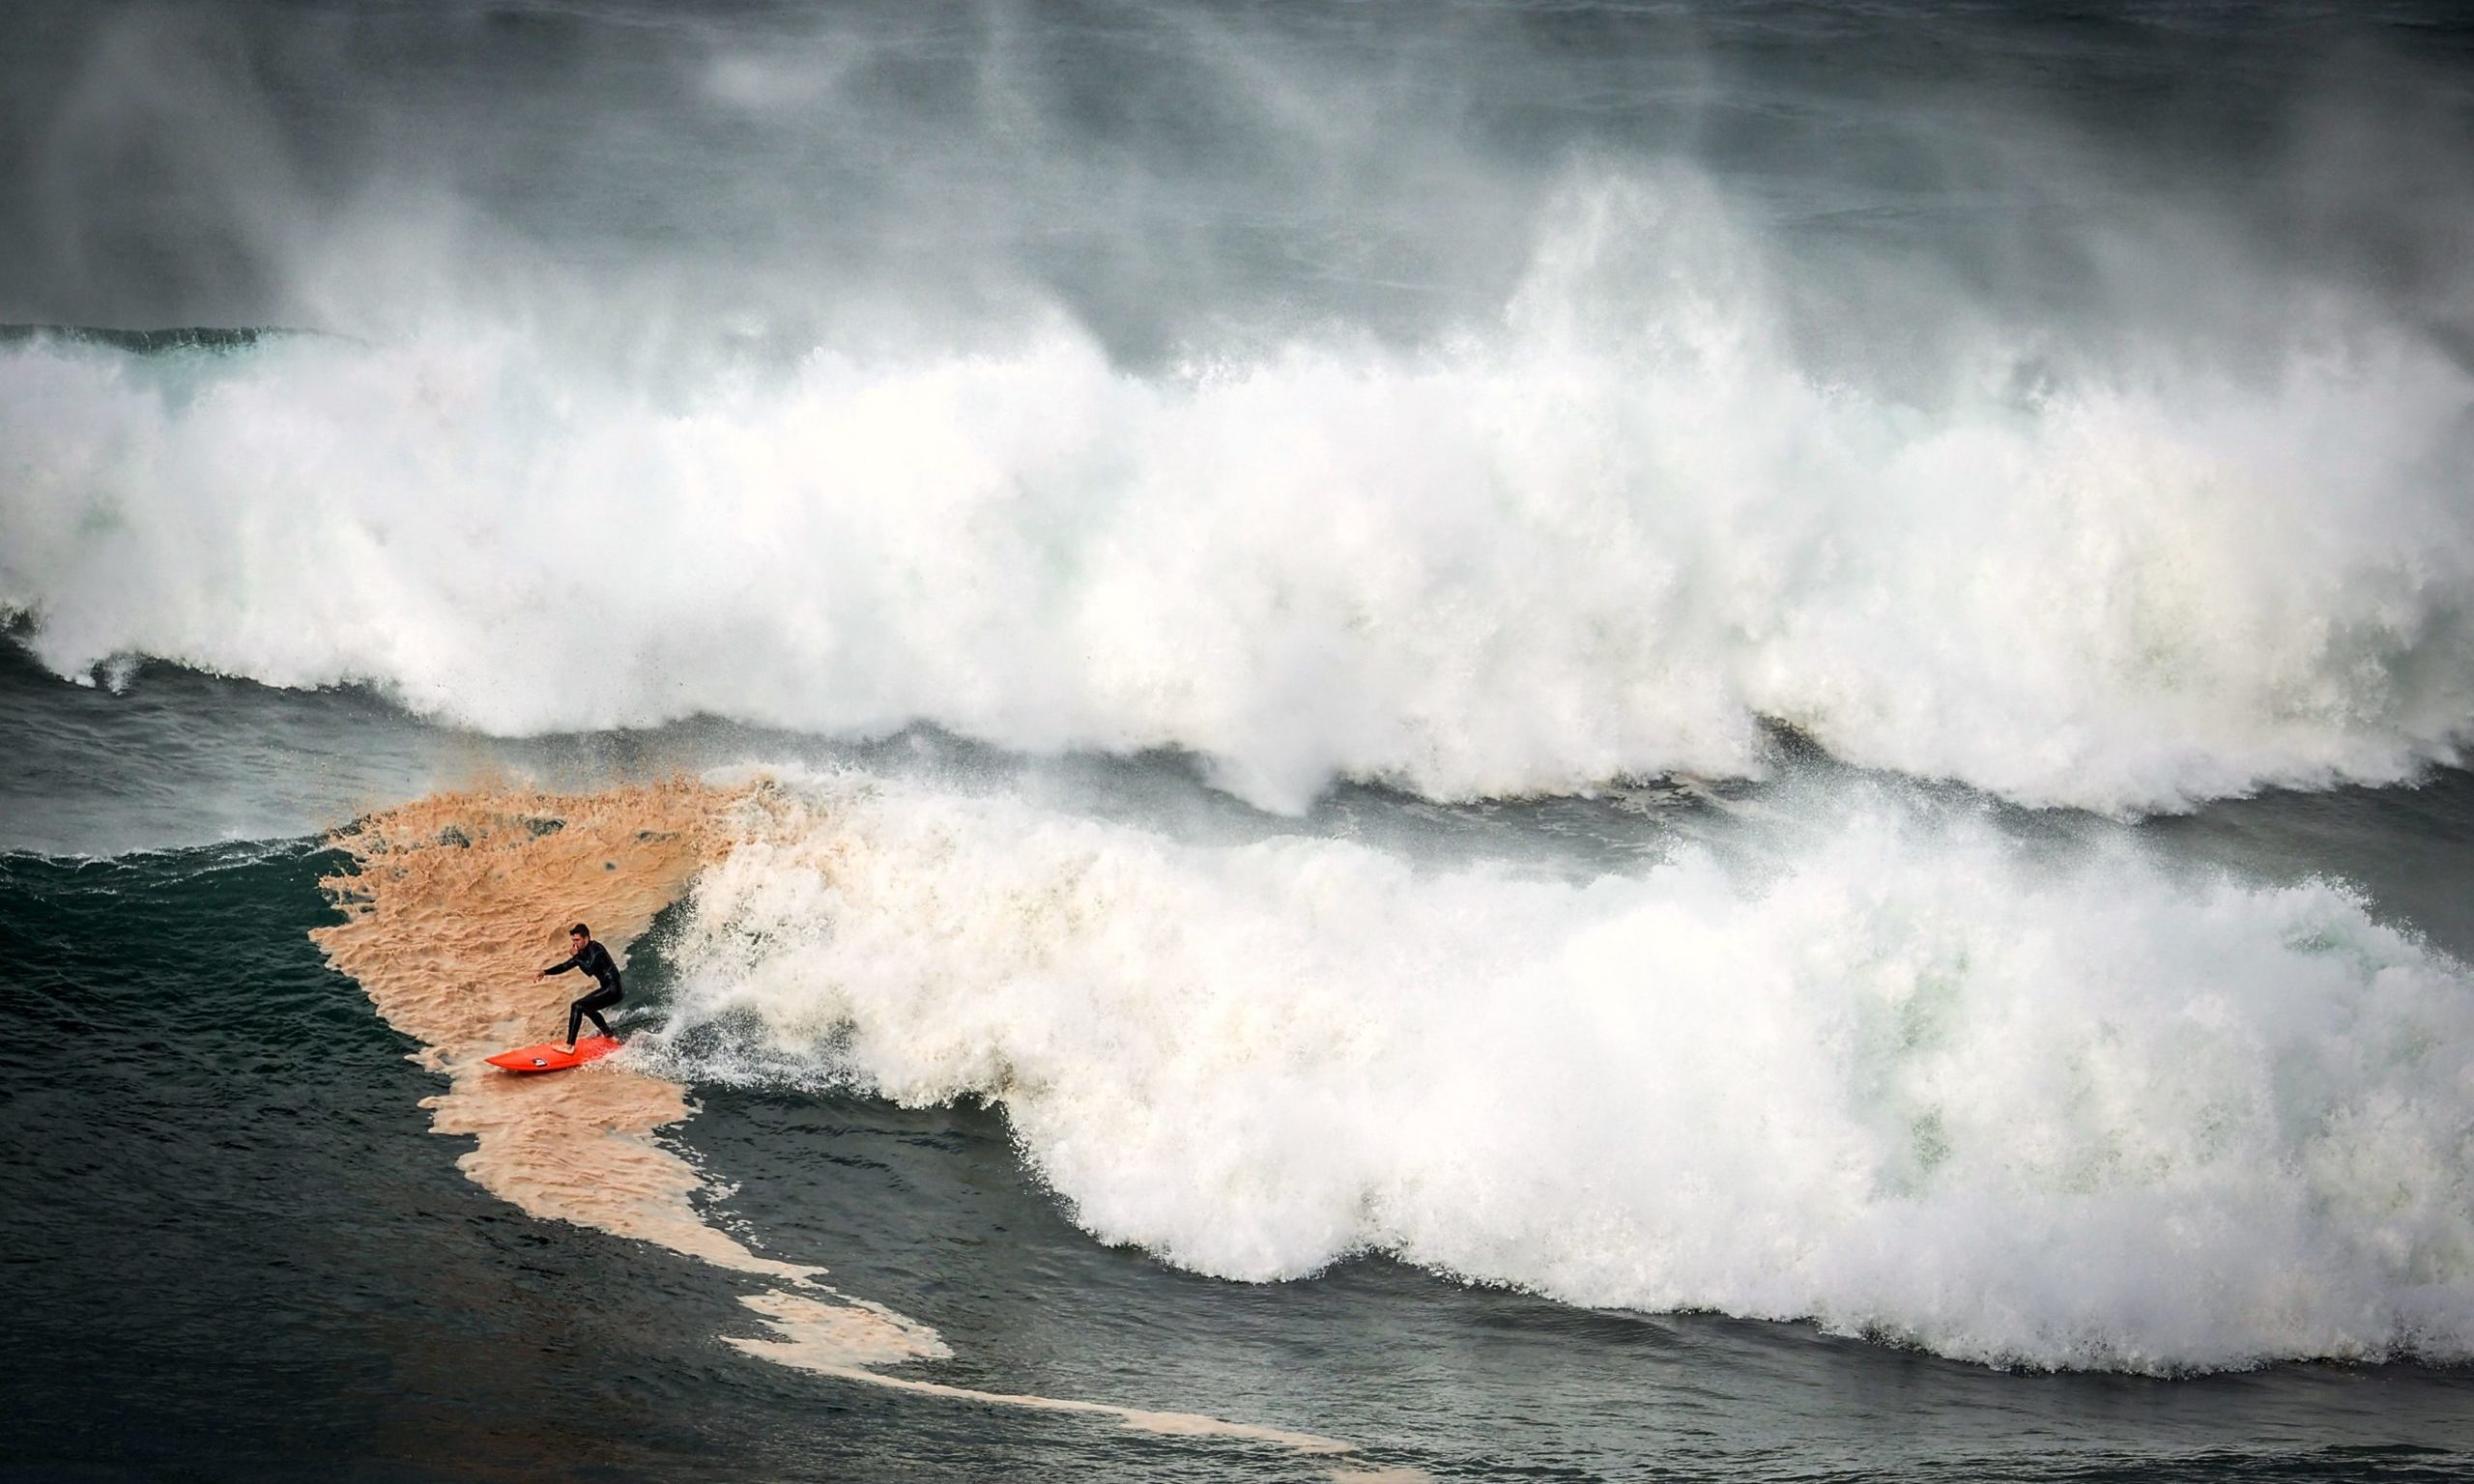 A surfer rides a large wave at Warriewood Beach during a stormy day.